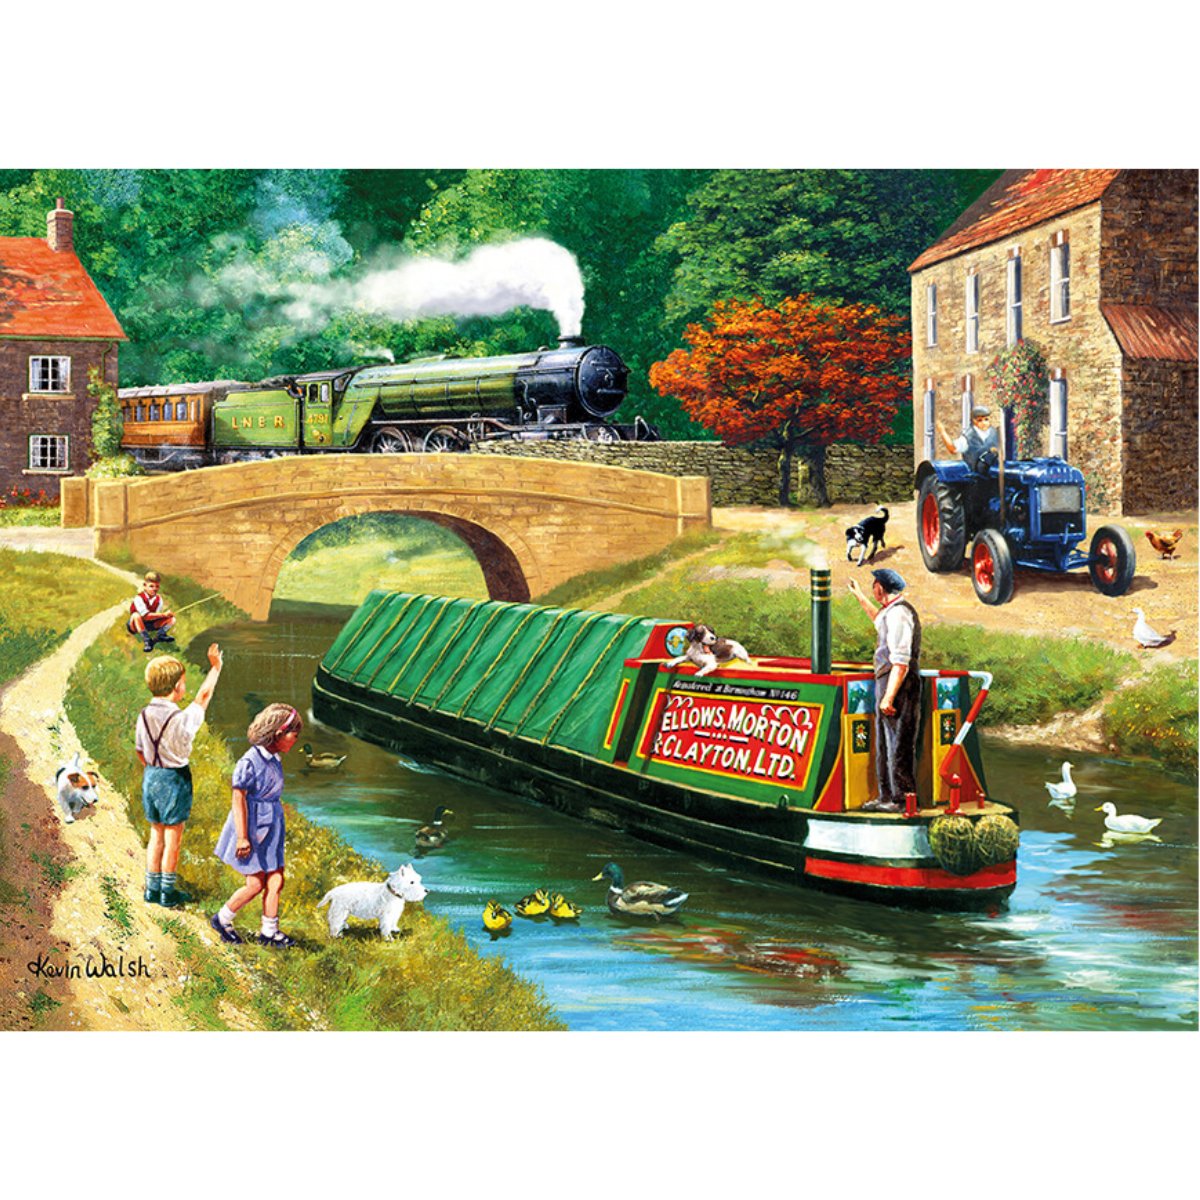 Rail & Canal - Kevin Walsh 1000 Piece Puzzle - Phillips Hobbies